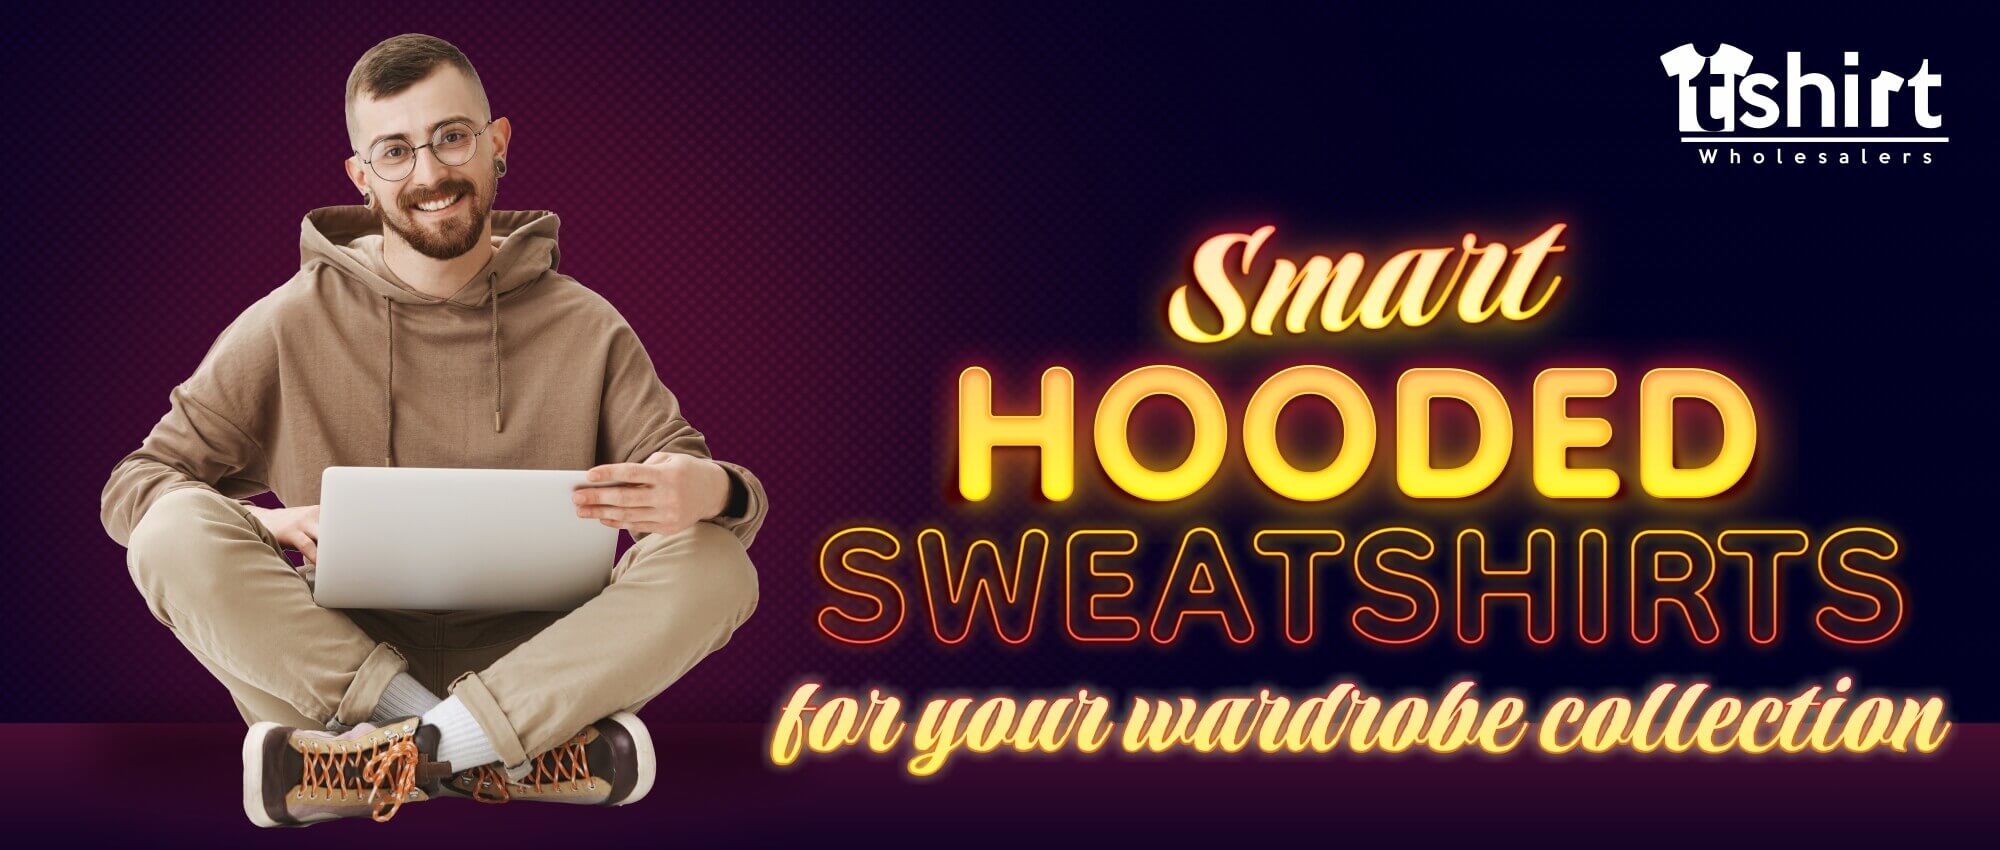 SMART HOODED SWEATSHIRTS FOR YOUR WARDROBE COLLECTION